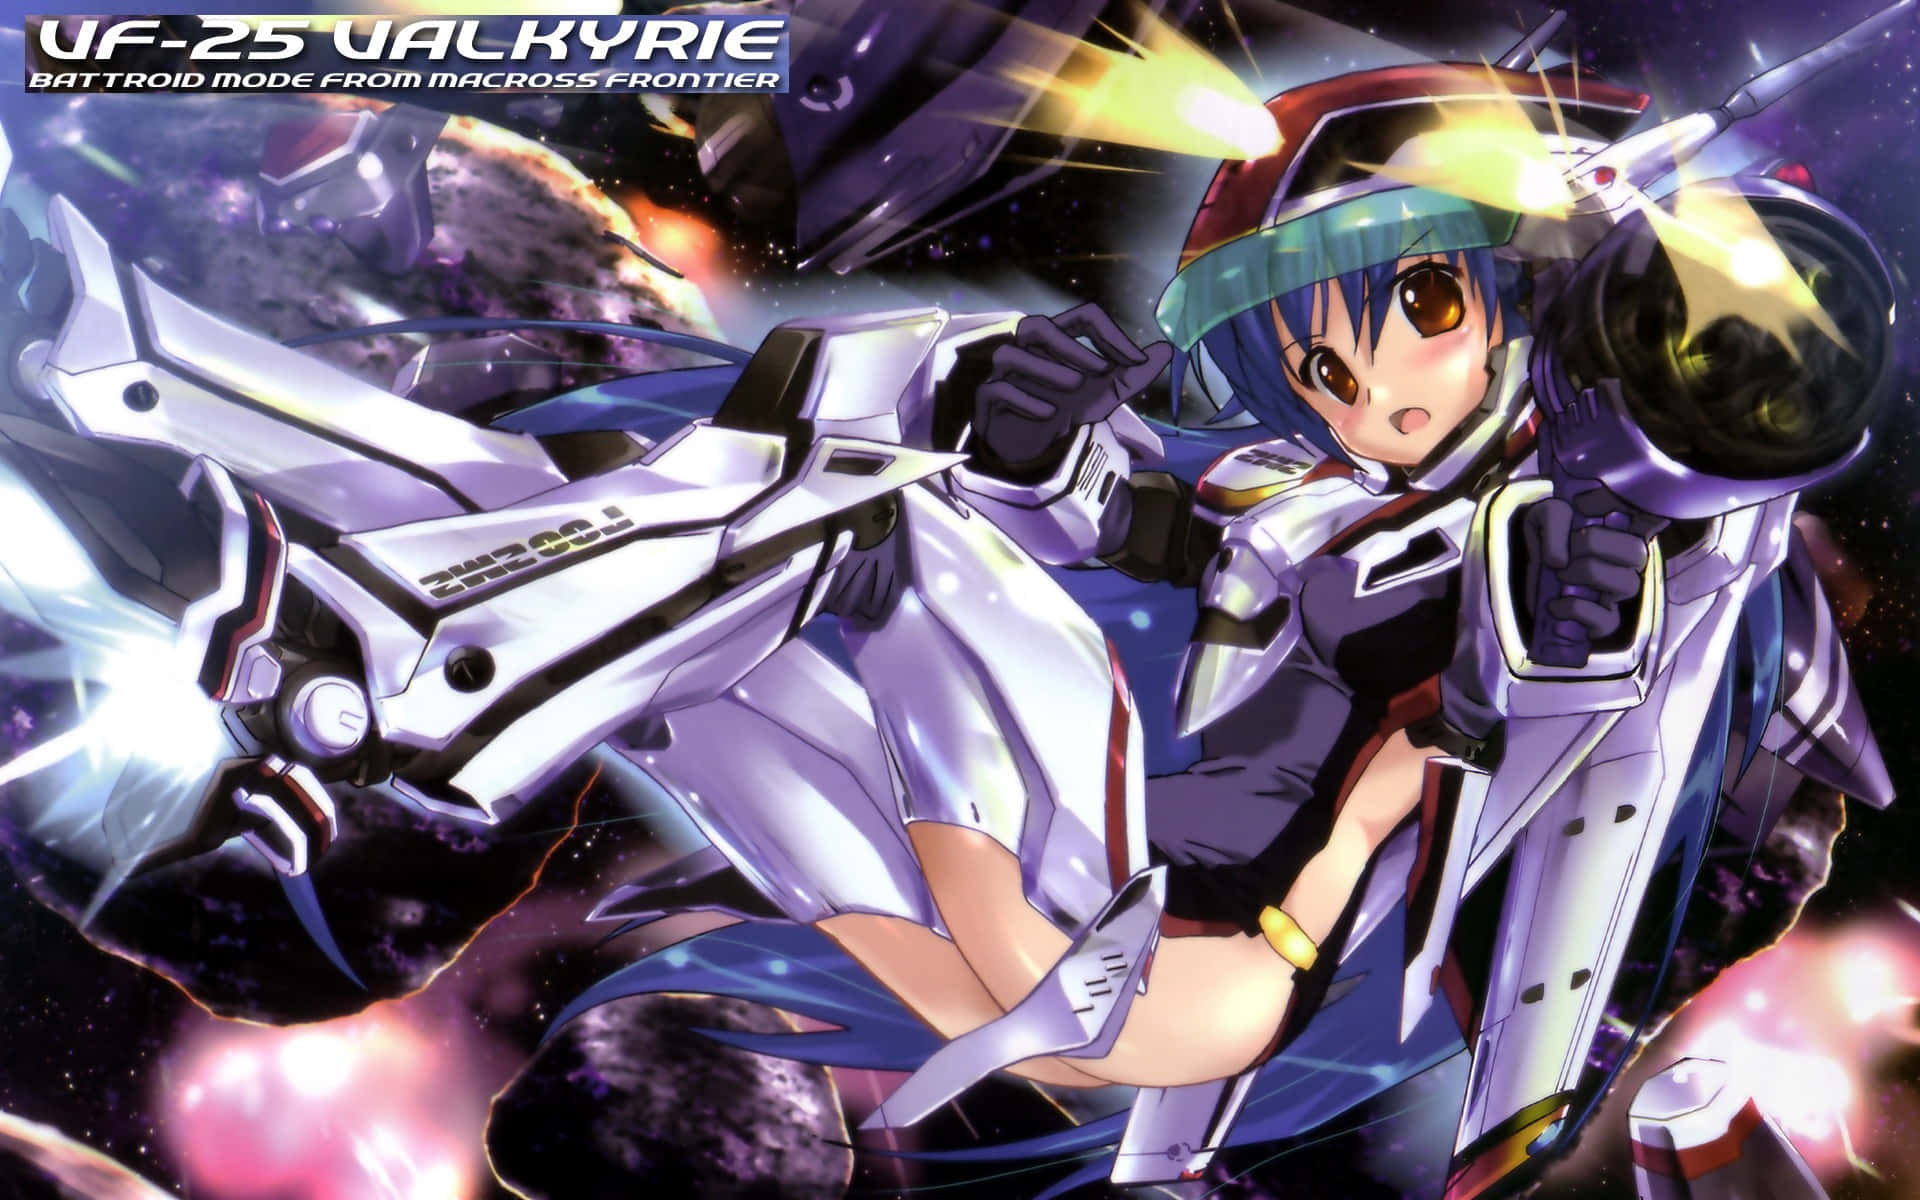 Explore the Beyond with the Legendary Macross